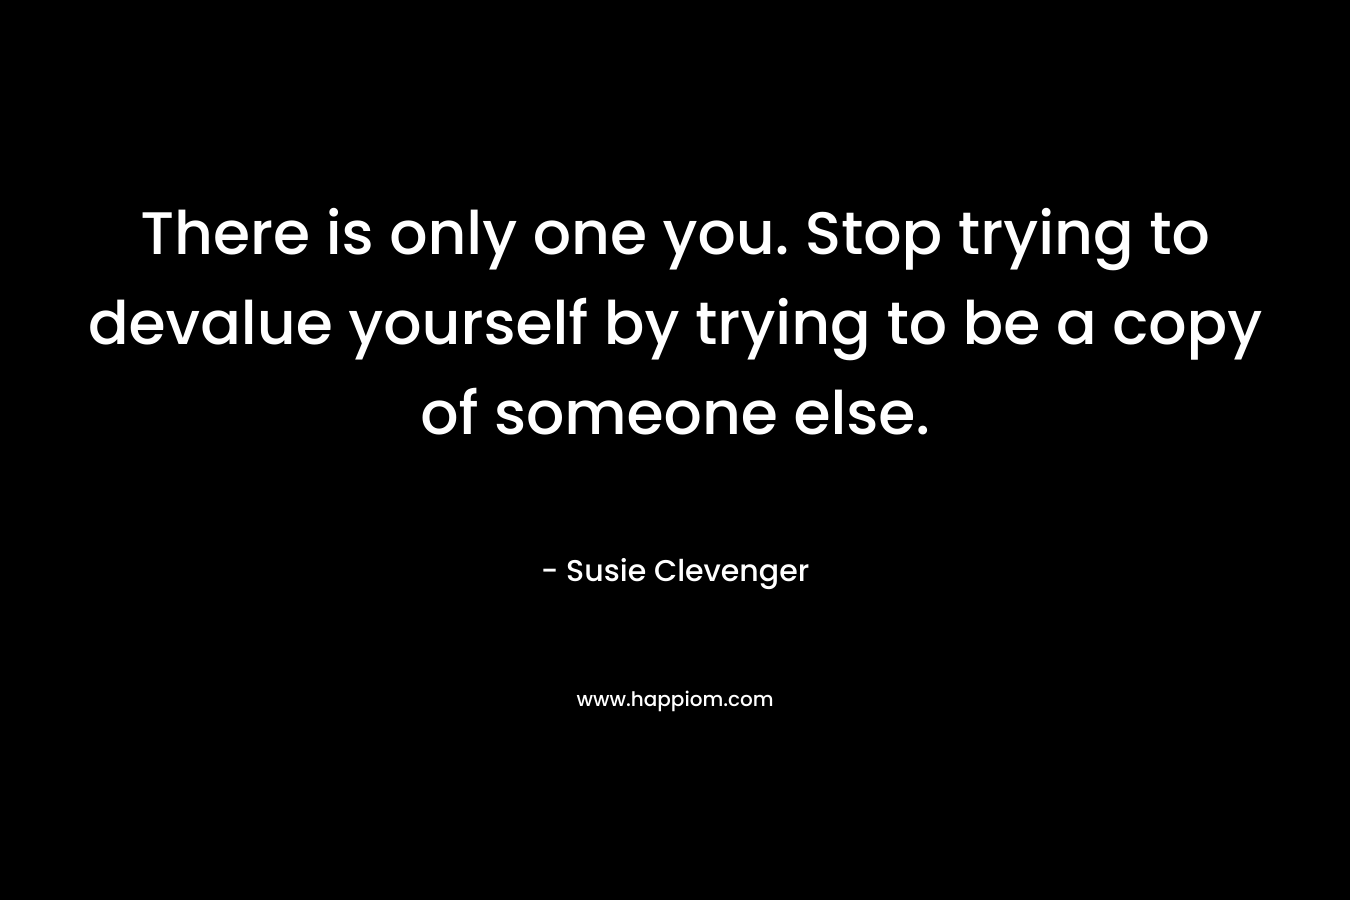 There is only one you. Stop trying to devalue yourself by trying to be a copy of someone else.